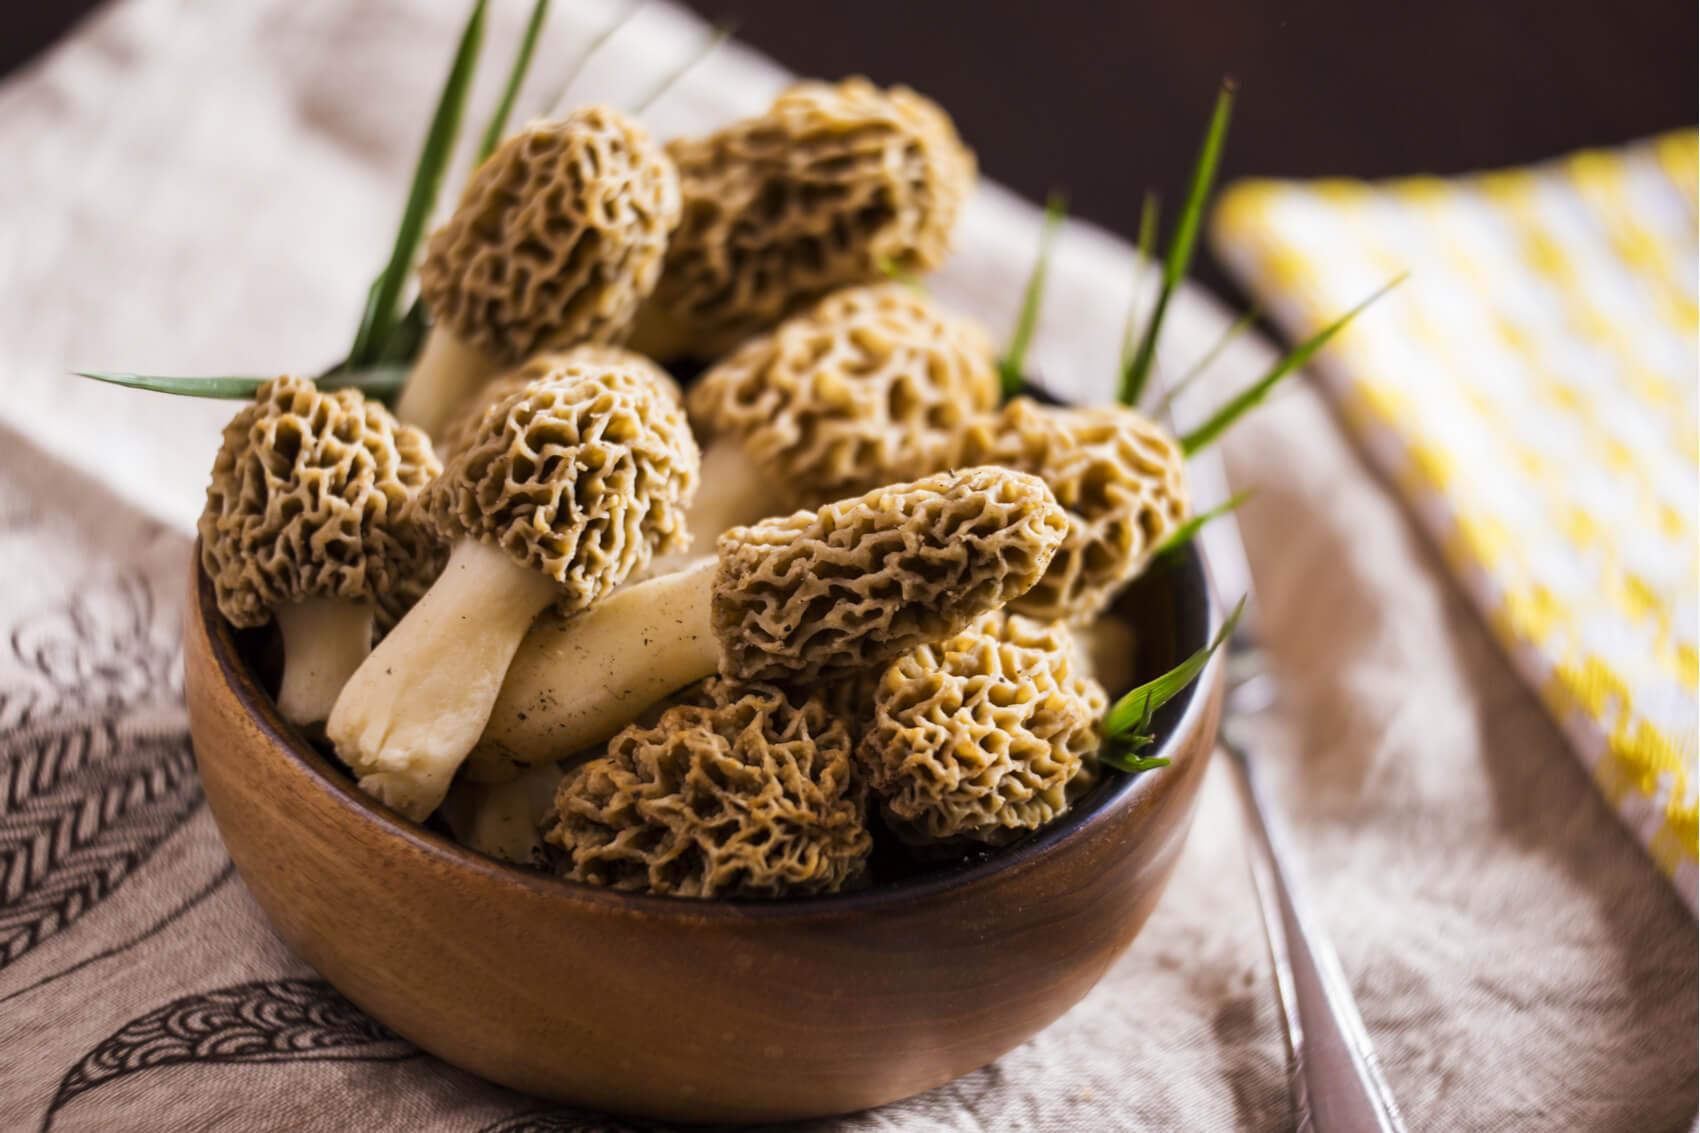 A small wooden bowl filled with fresh morel mushrooms. 